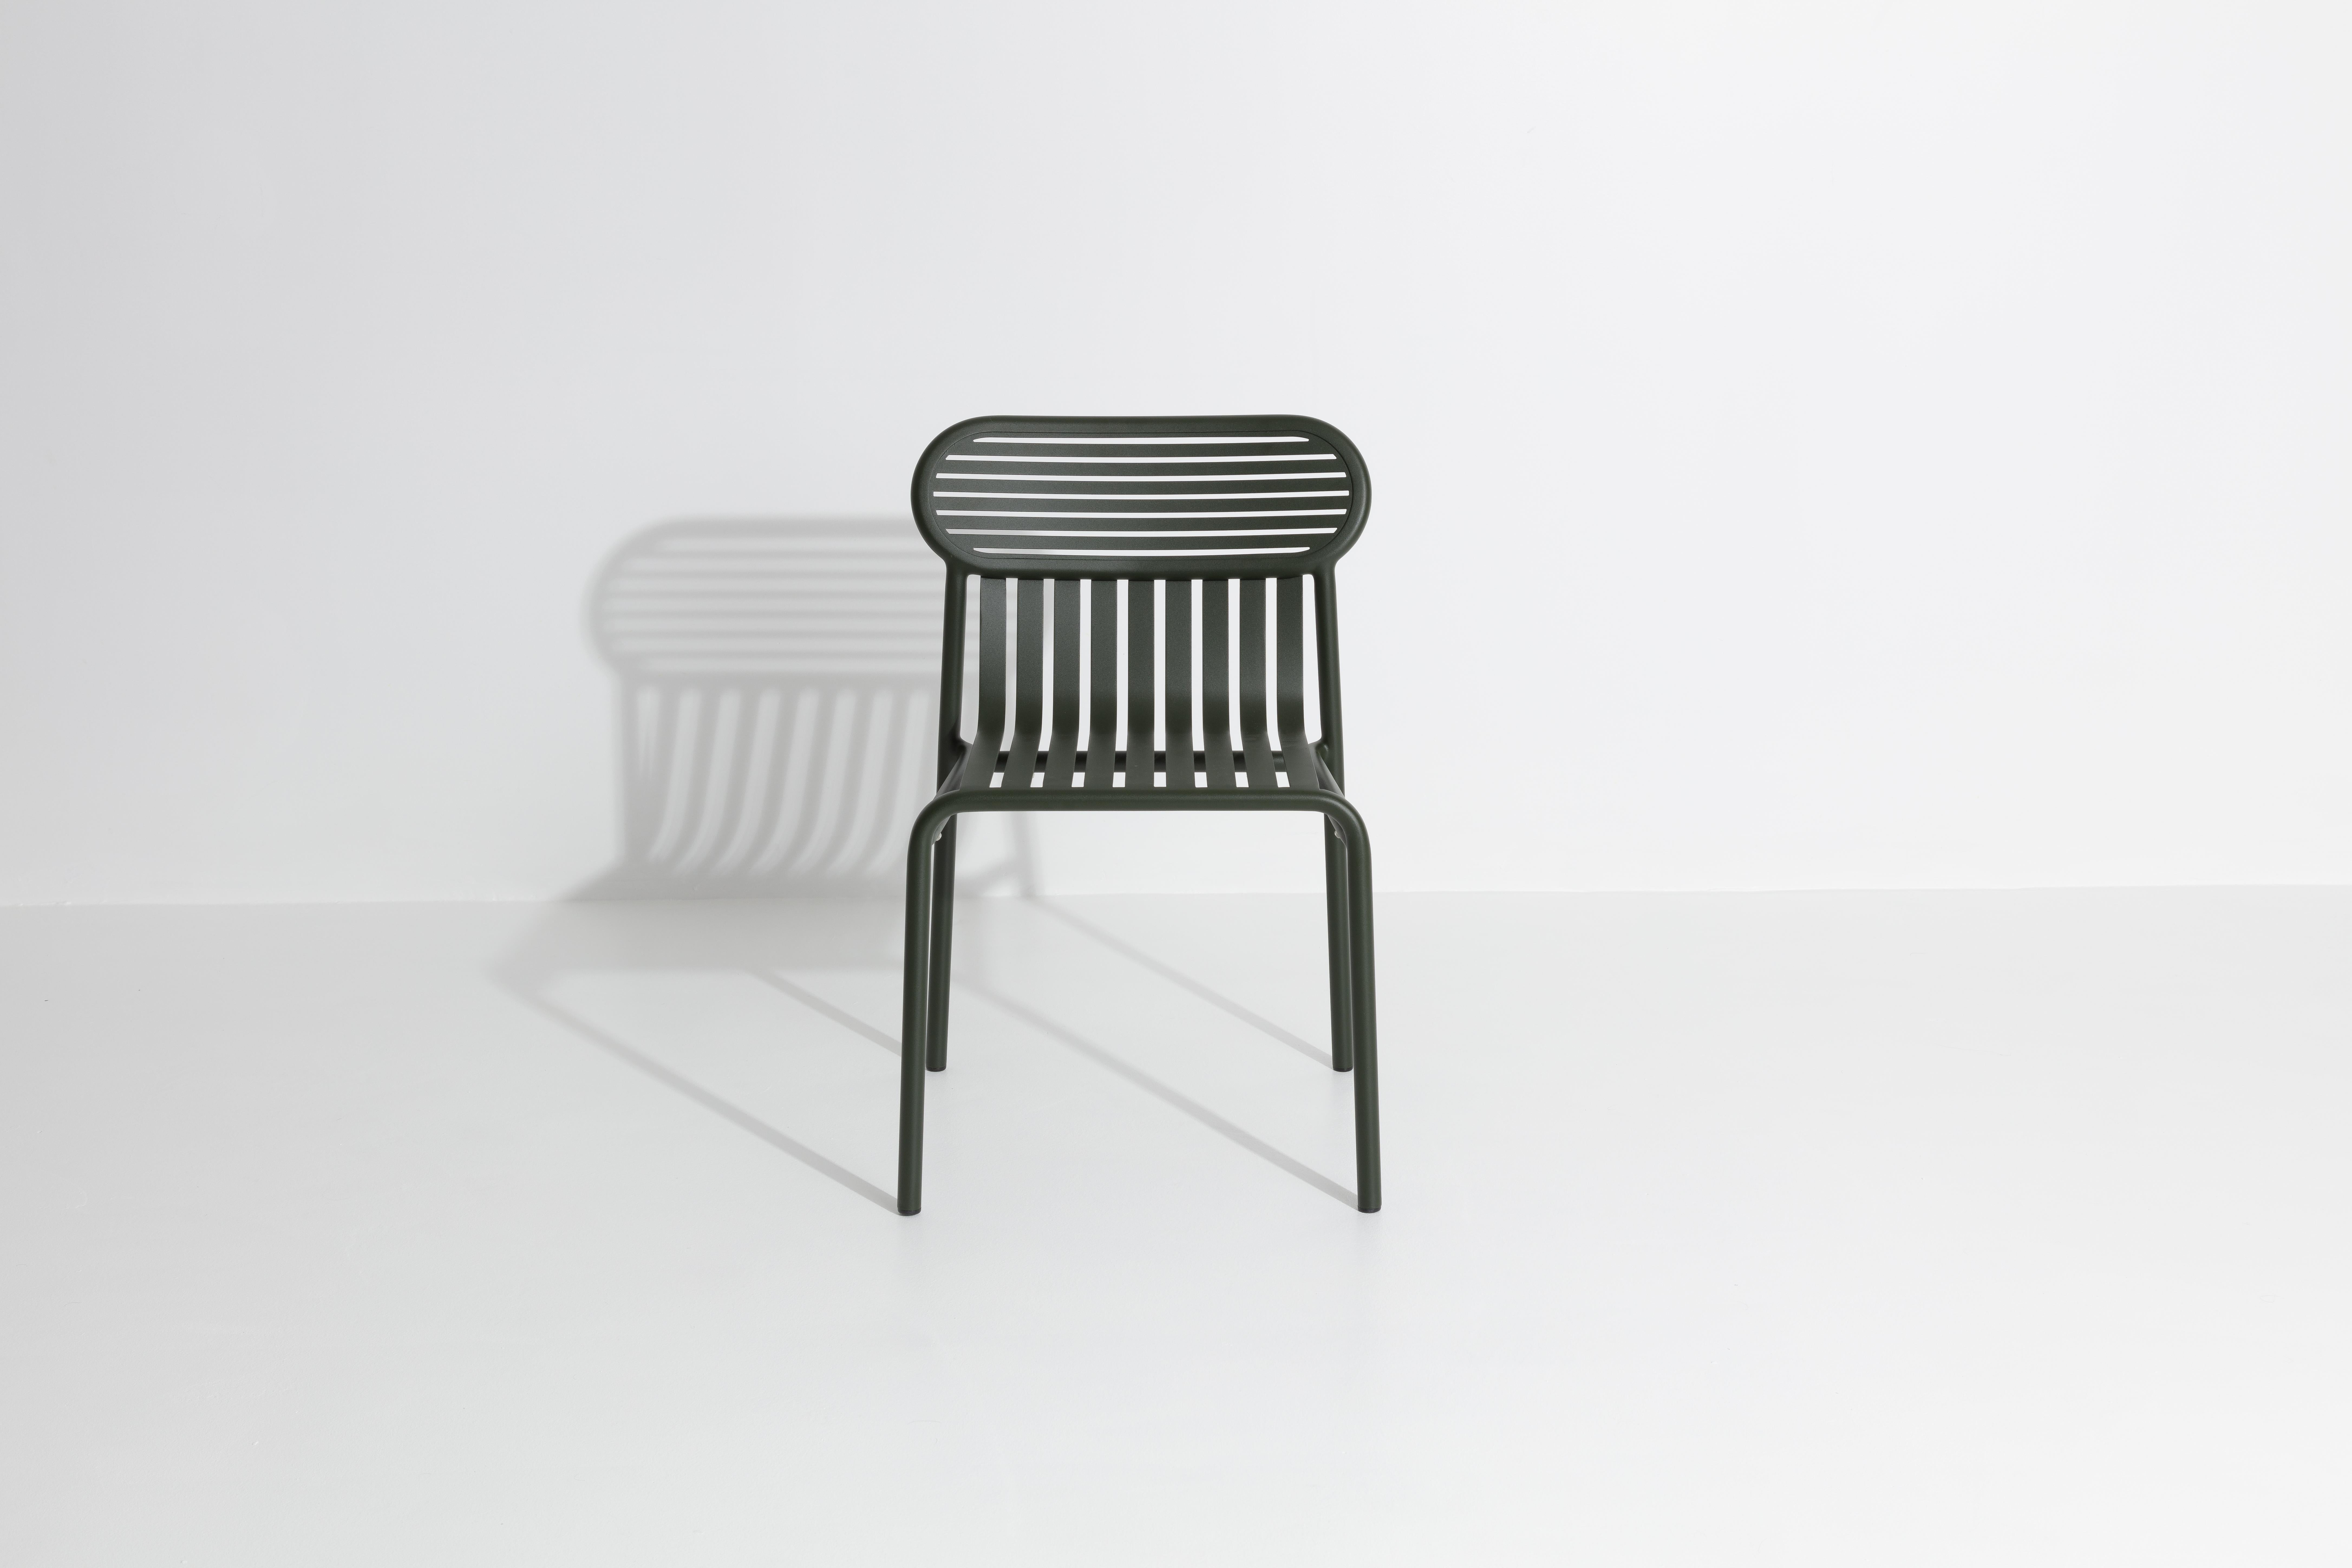 Petite Friture Week-End Chair in Glass Green Aluminium by Studio BrichetZiegler, 2017

The week-end collection is a full range of outdoor furniture, in aluminium grained epoxy paint, matt finish, that includes 18 functions and 8 colours for the